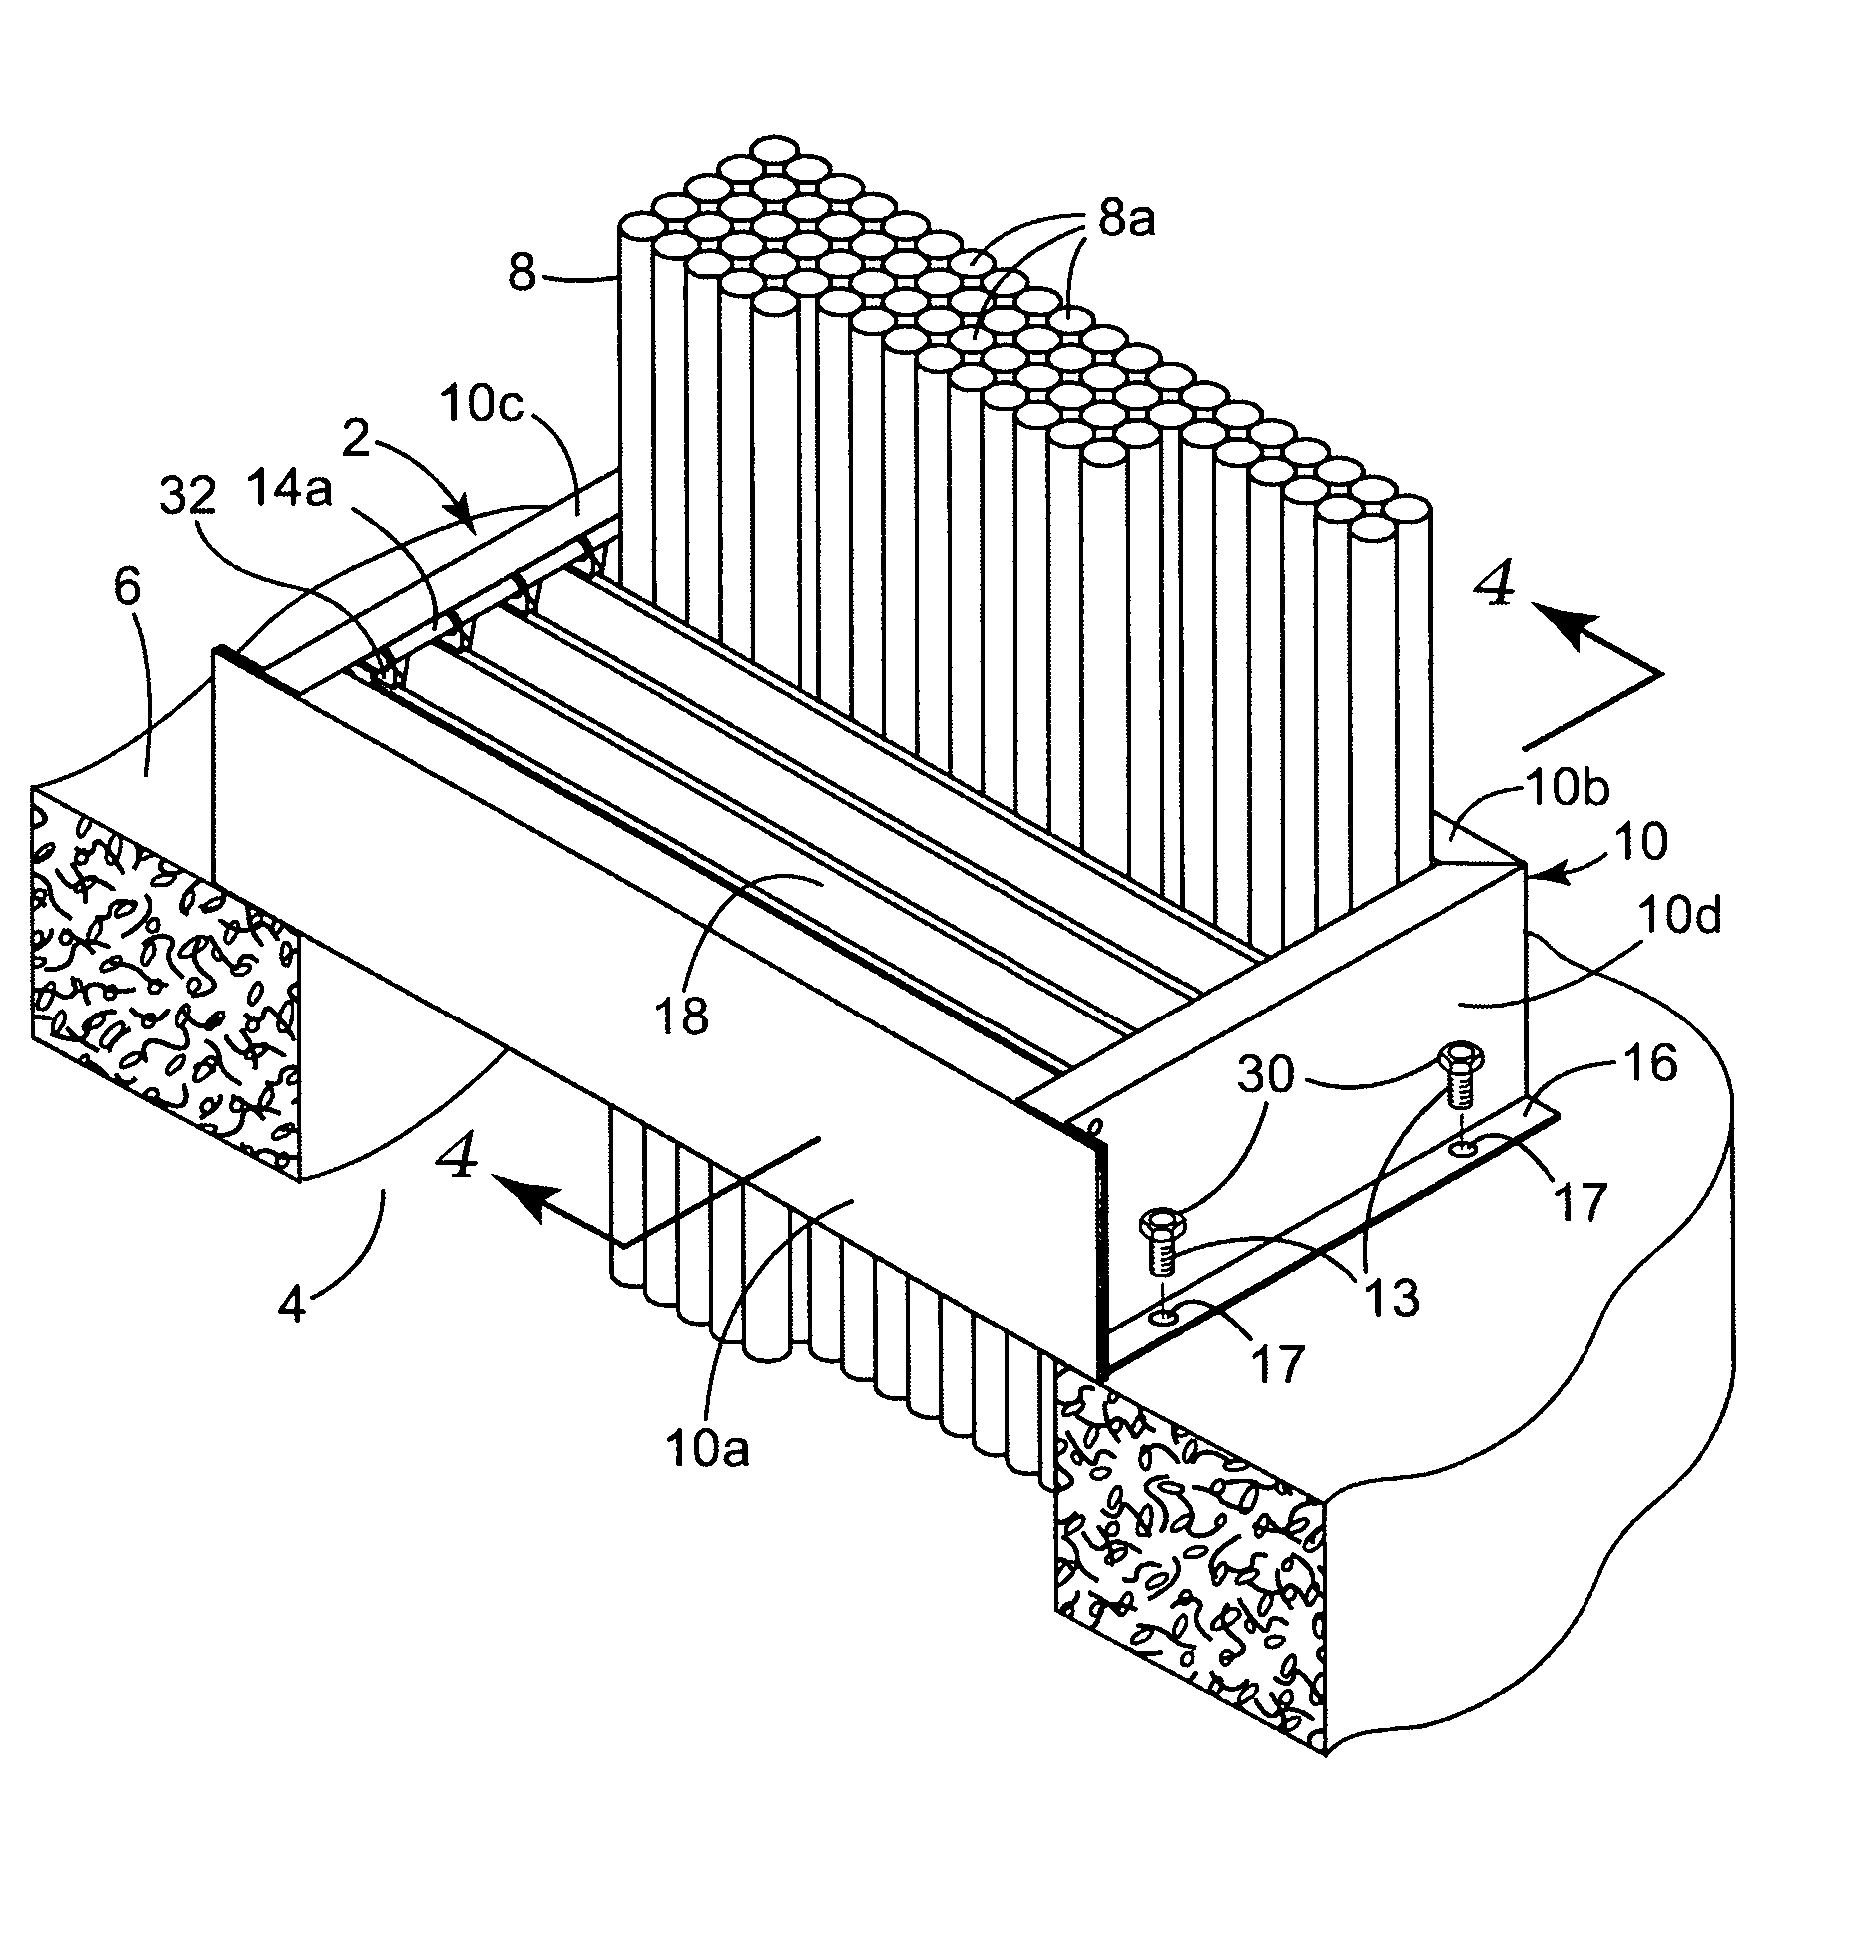 Method and apparatus for firestopping a through-penetration